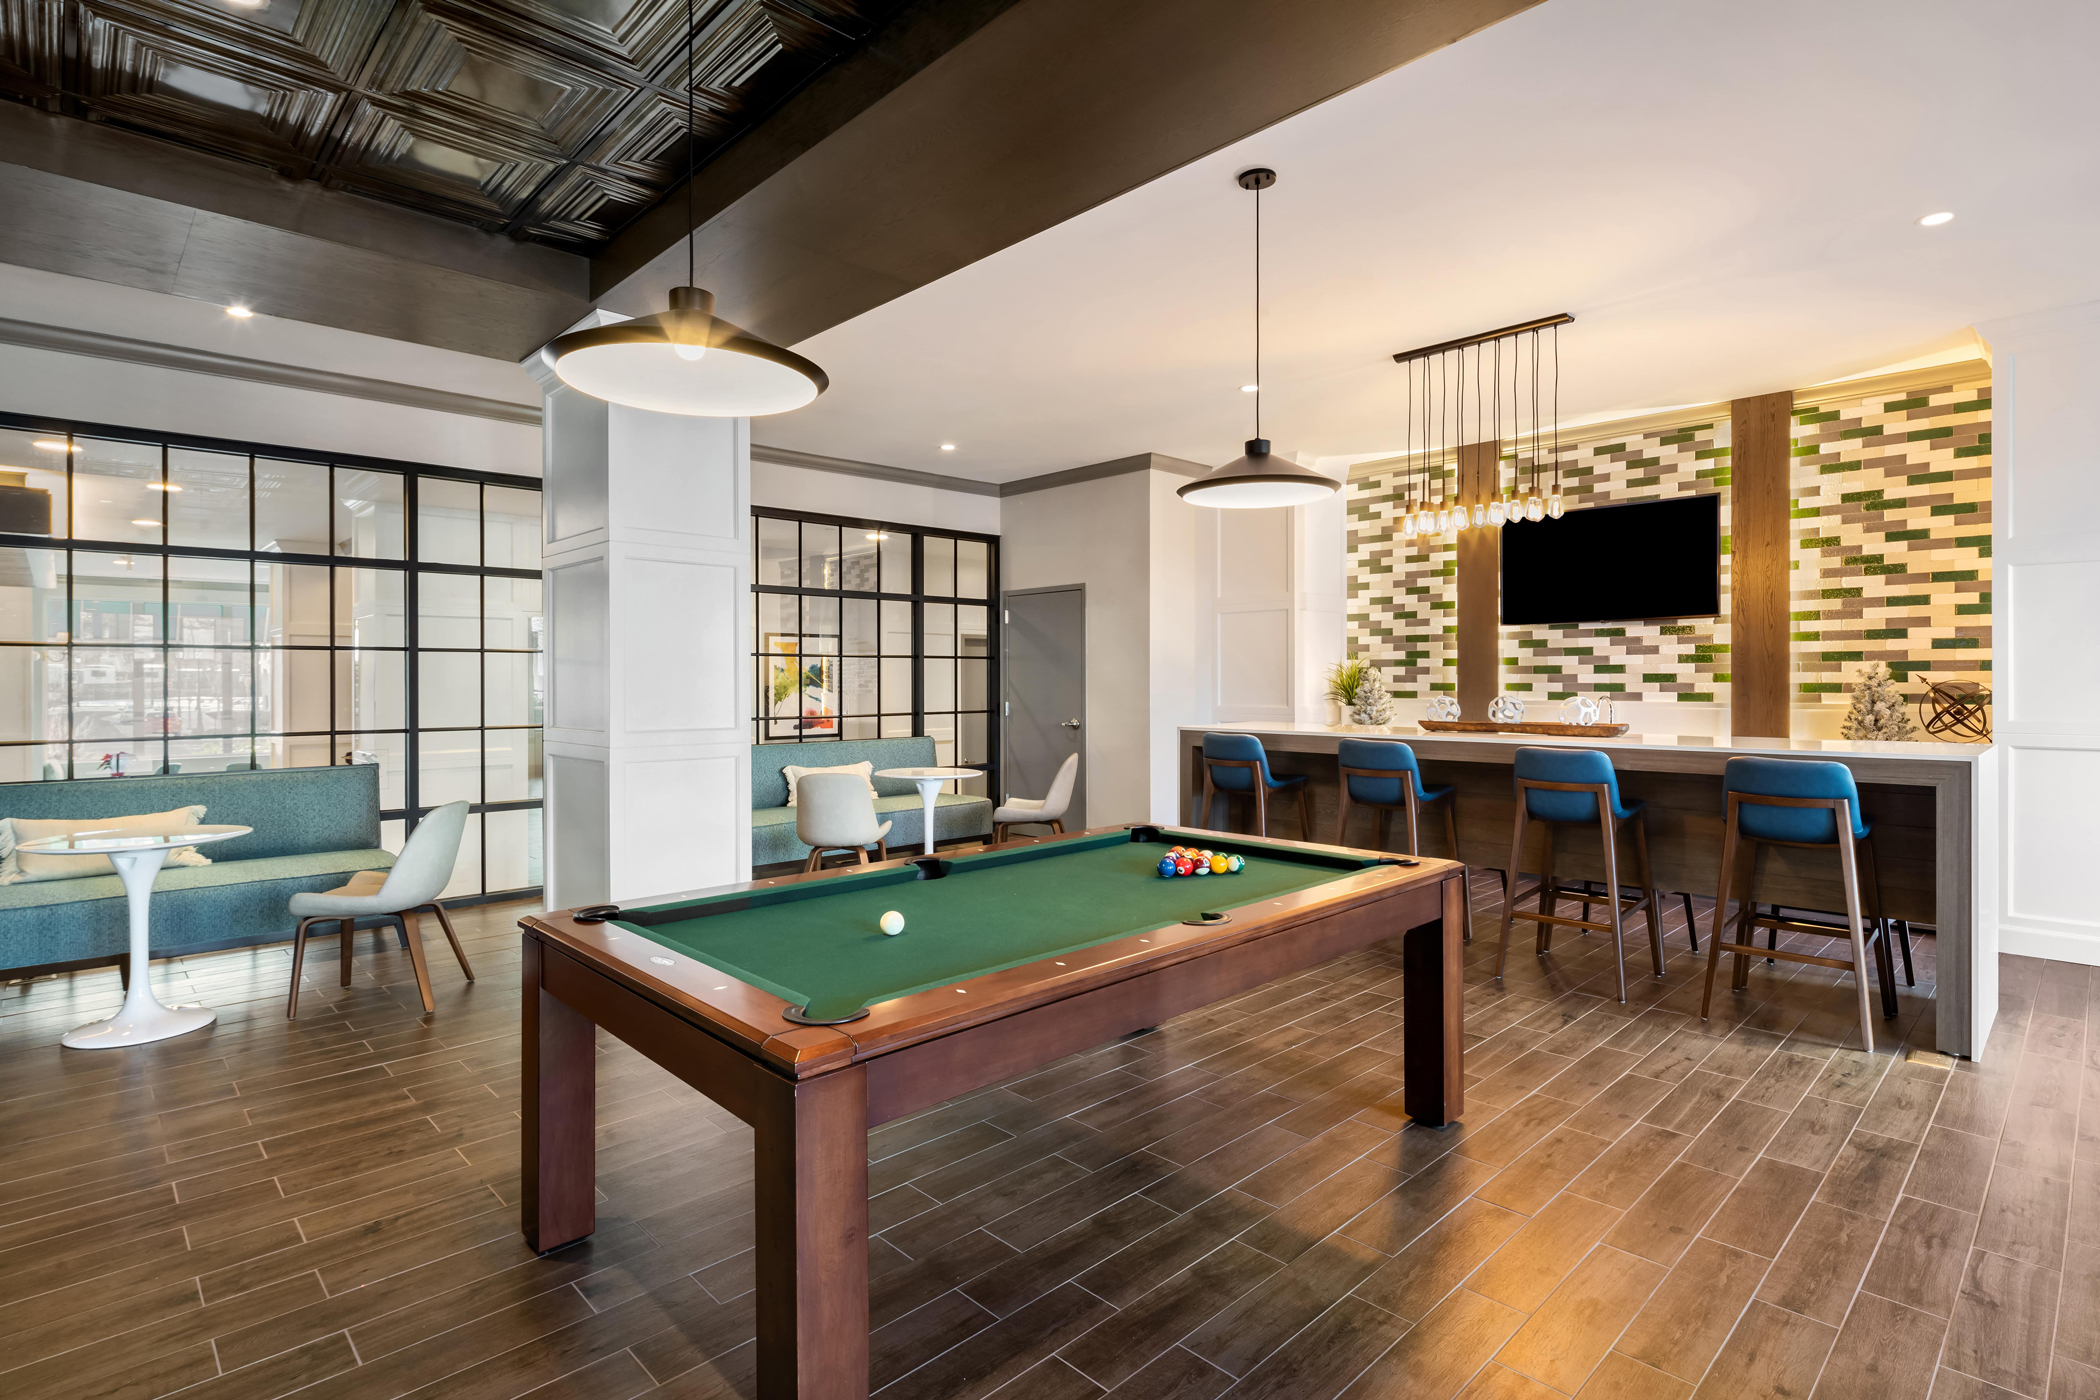 A game room featuring a pool table, seating spaces and tables and a dining and kitchen area.